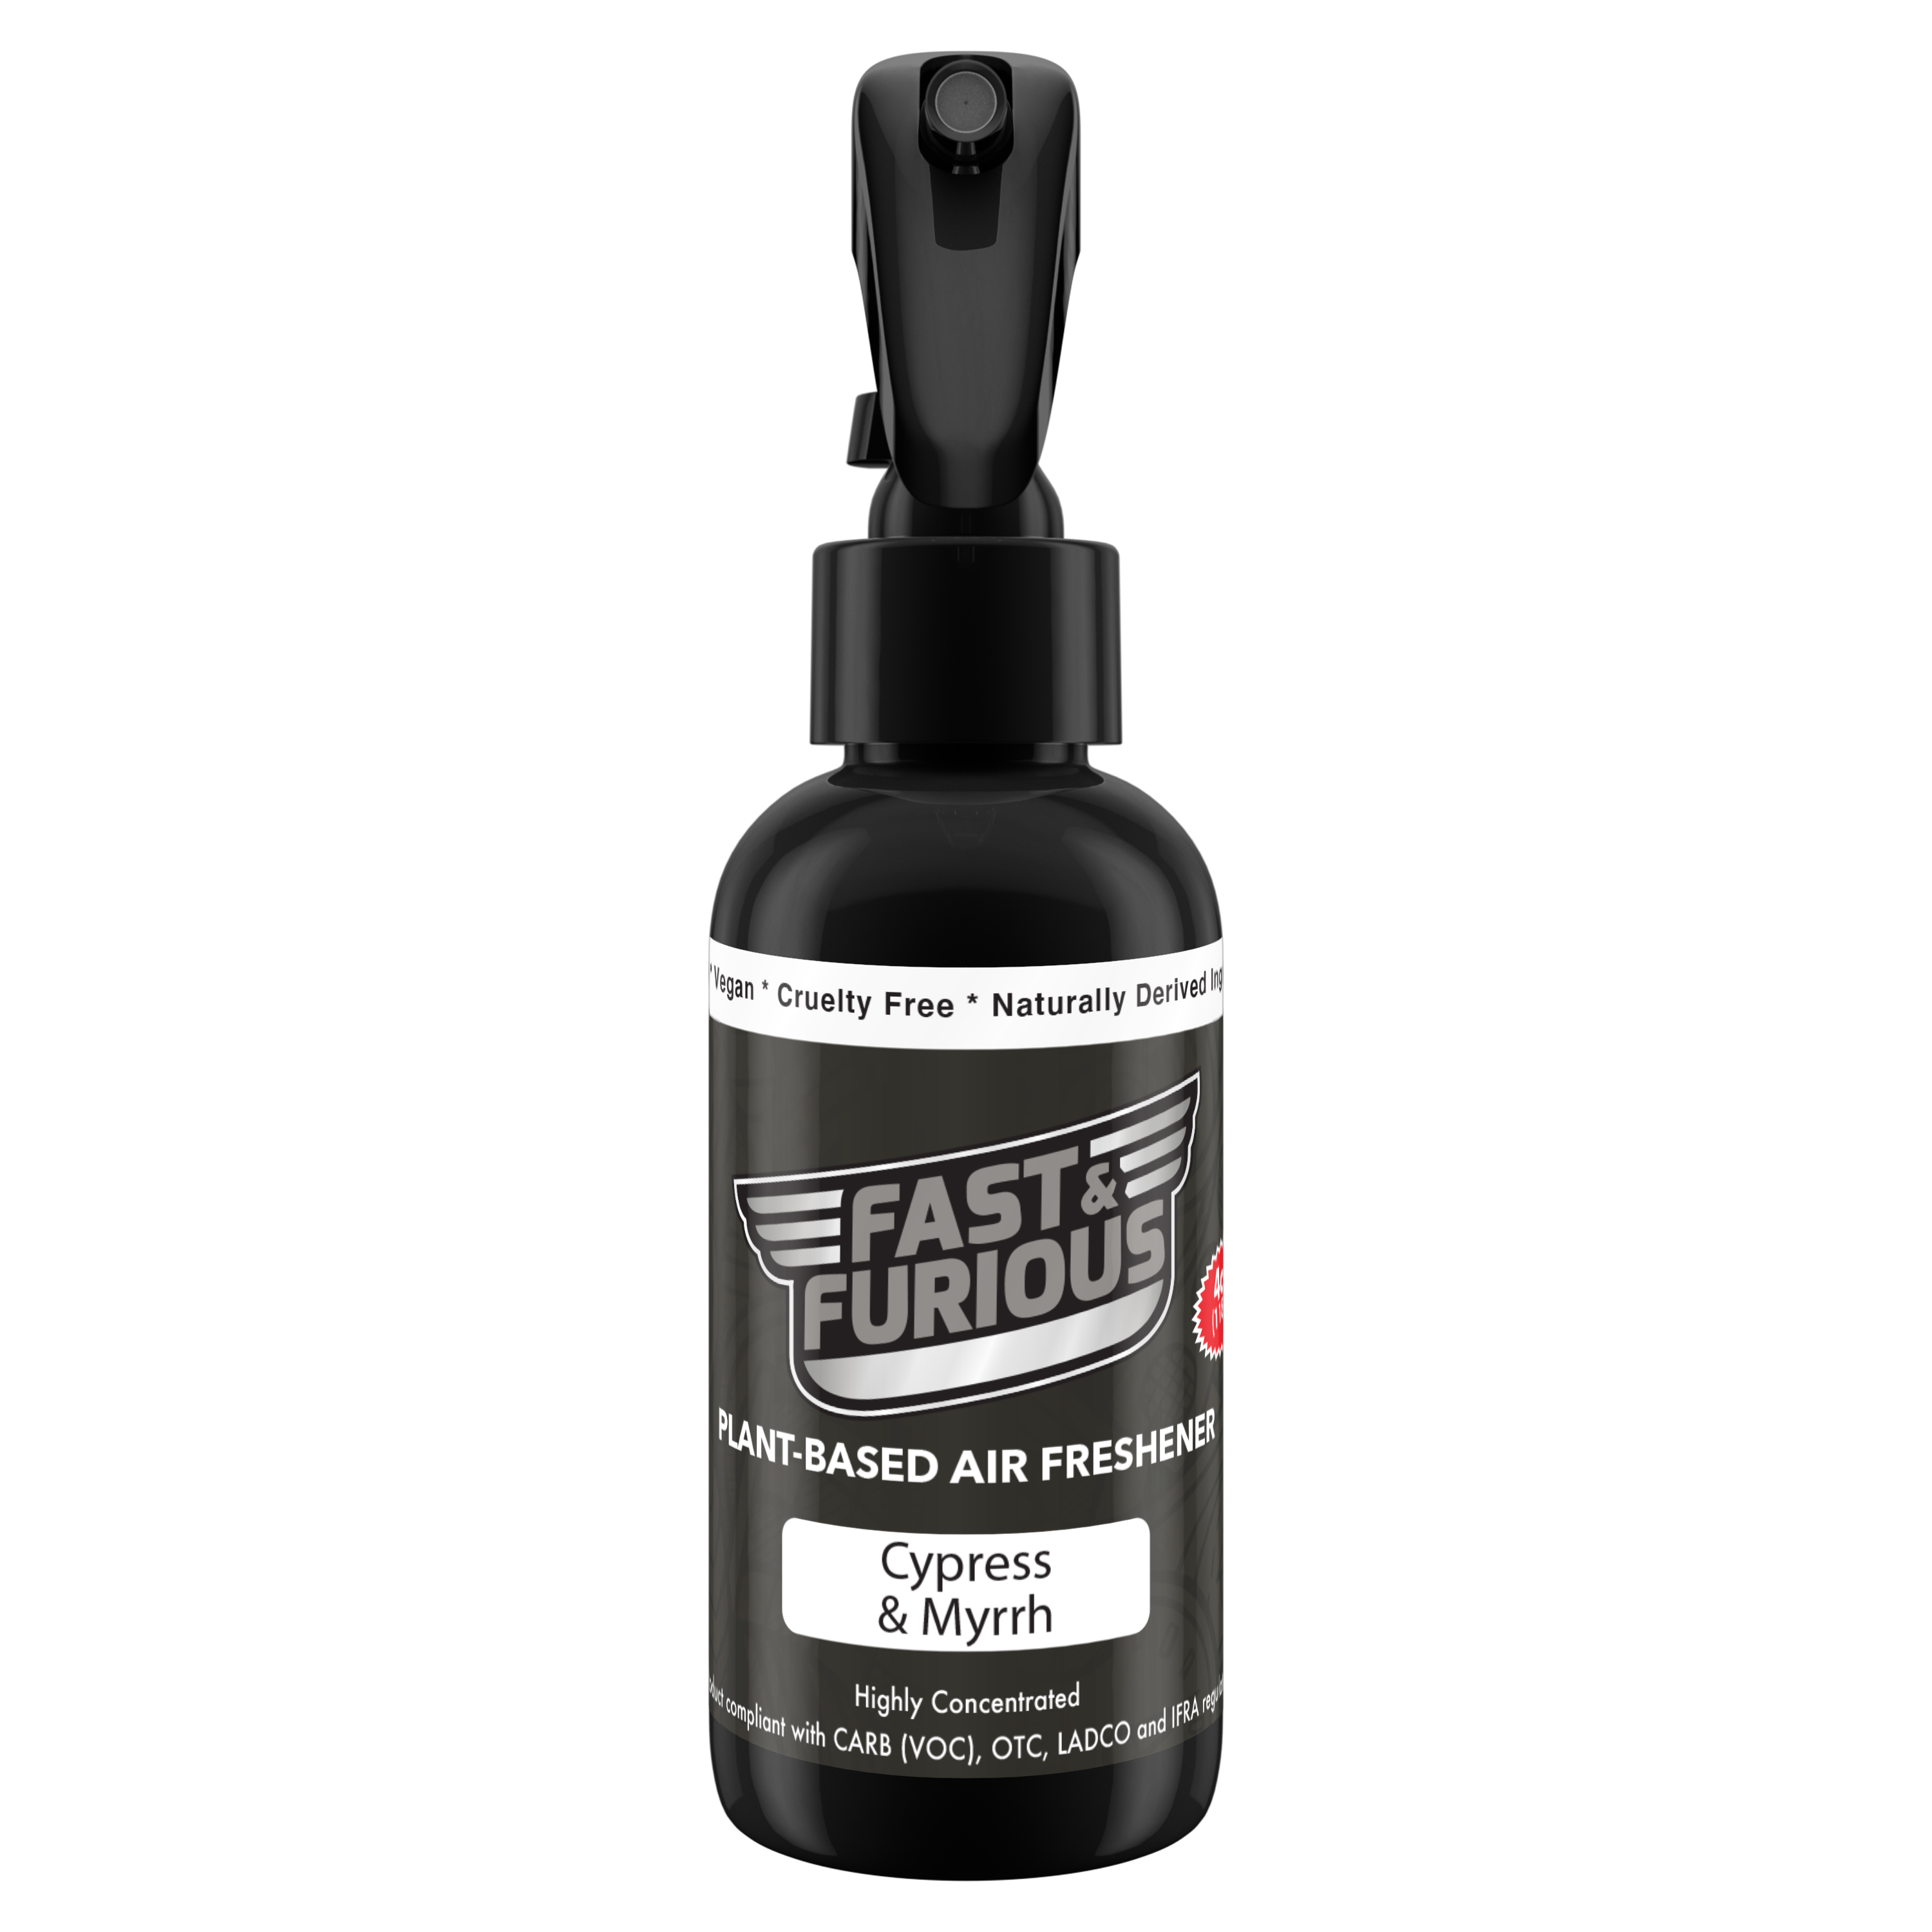 Fast and Furious Plant-Based Air Freshener - Cypress & Myrrh Scent